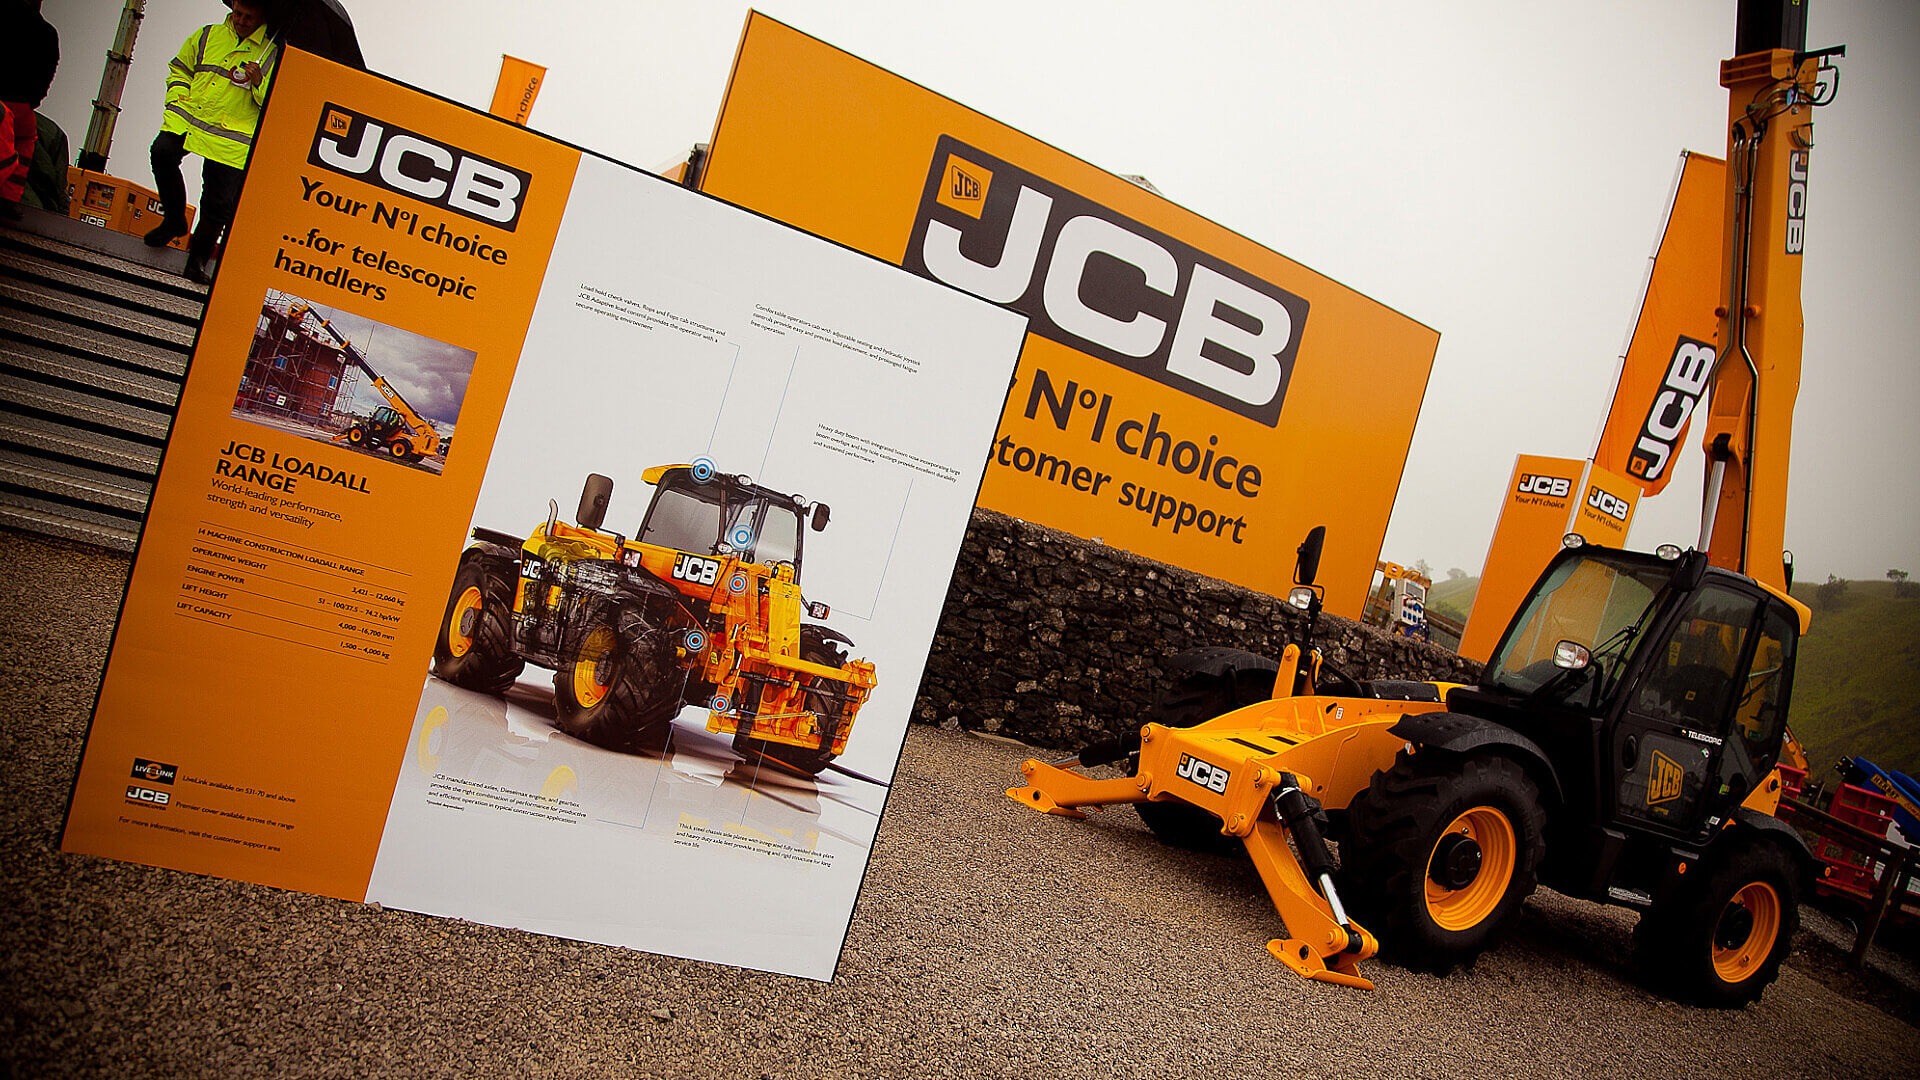 jcb telehandler display with large info sign